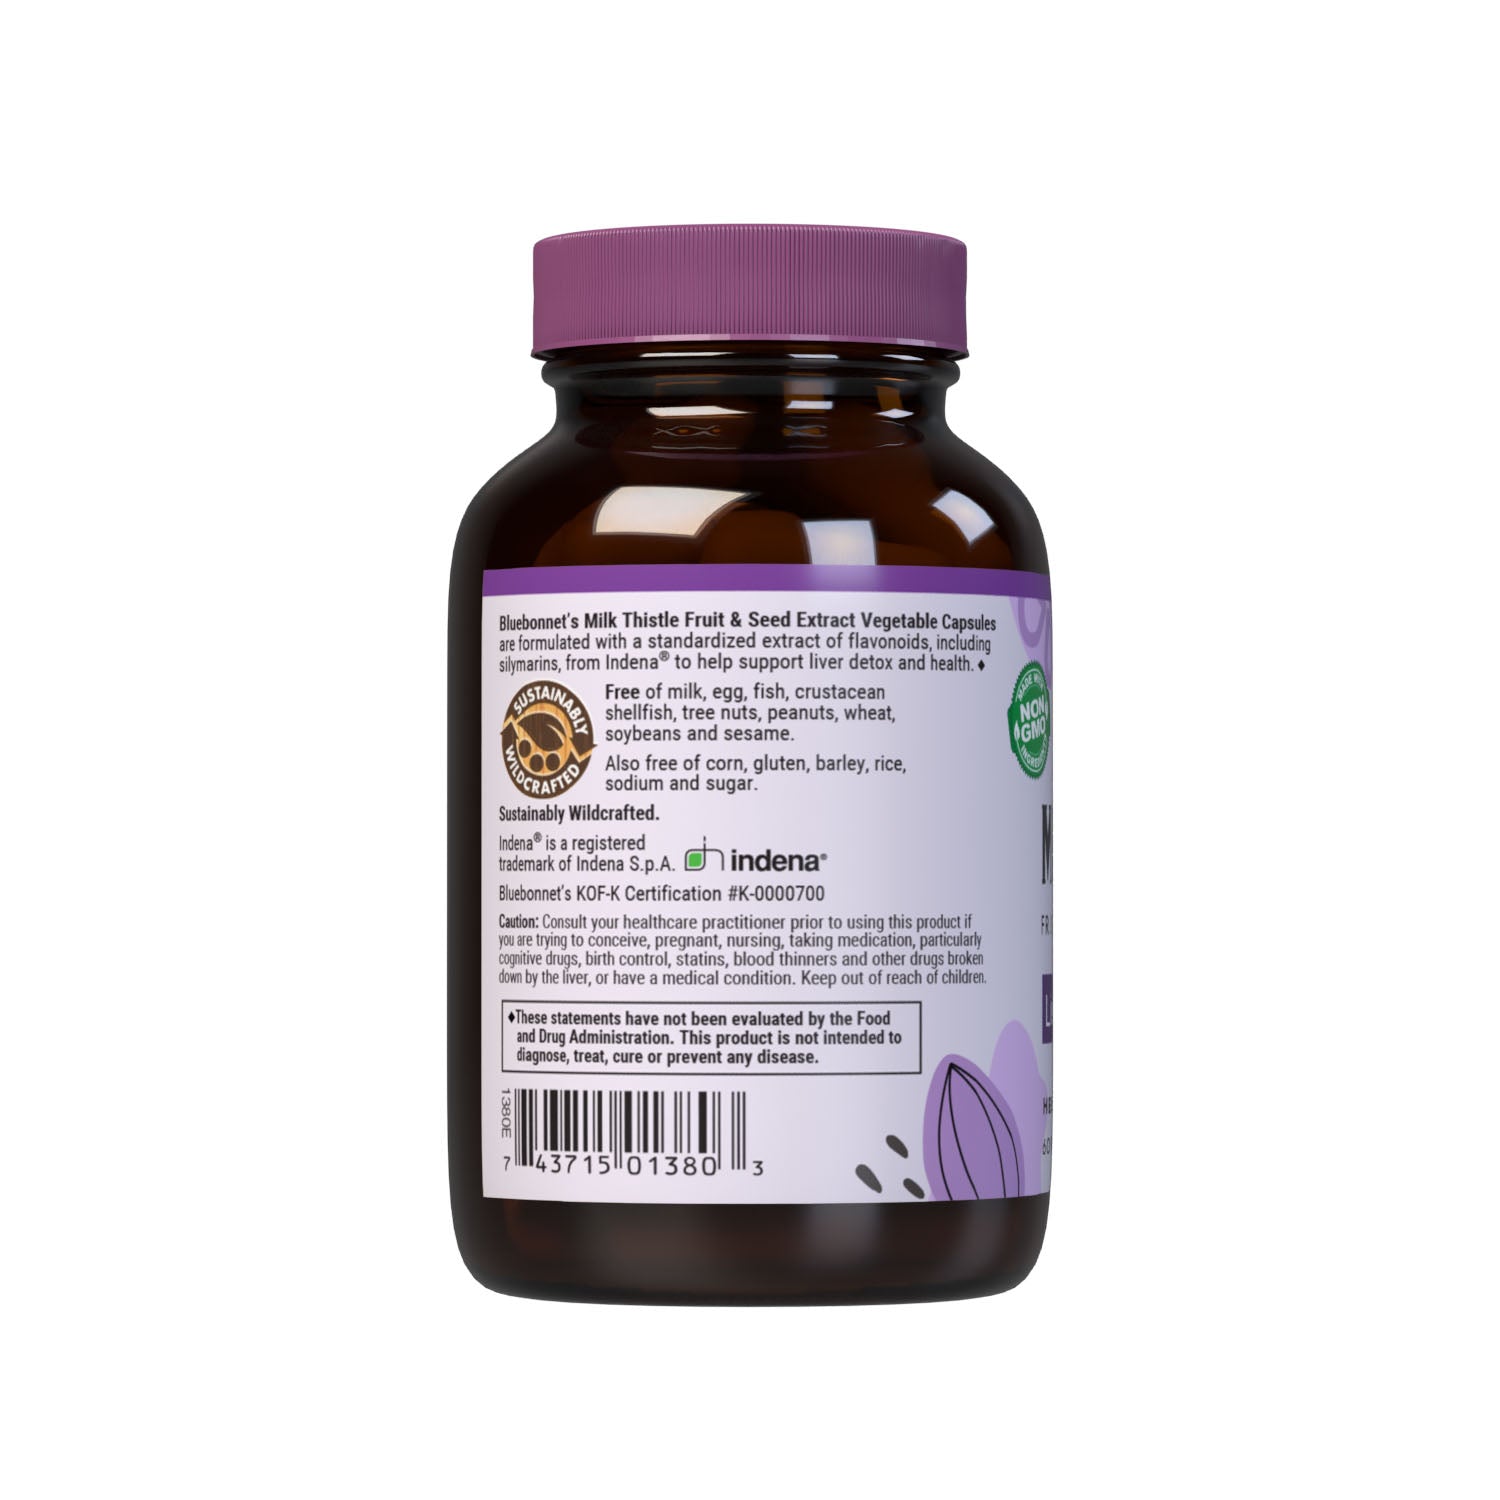 Bluebonnet’s Milk Thistle Fruit & Seed Extract 60 Vegetable Capsules contain a standardized extract from Indena of total flavonoids [including silymarins], the most researched active constituents found in milk thistle. A clean and gentle water-based extraction method is employed to capture and preserve milk thistle’s most valuable components. Description panel. #size_60 count